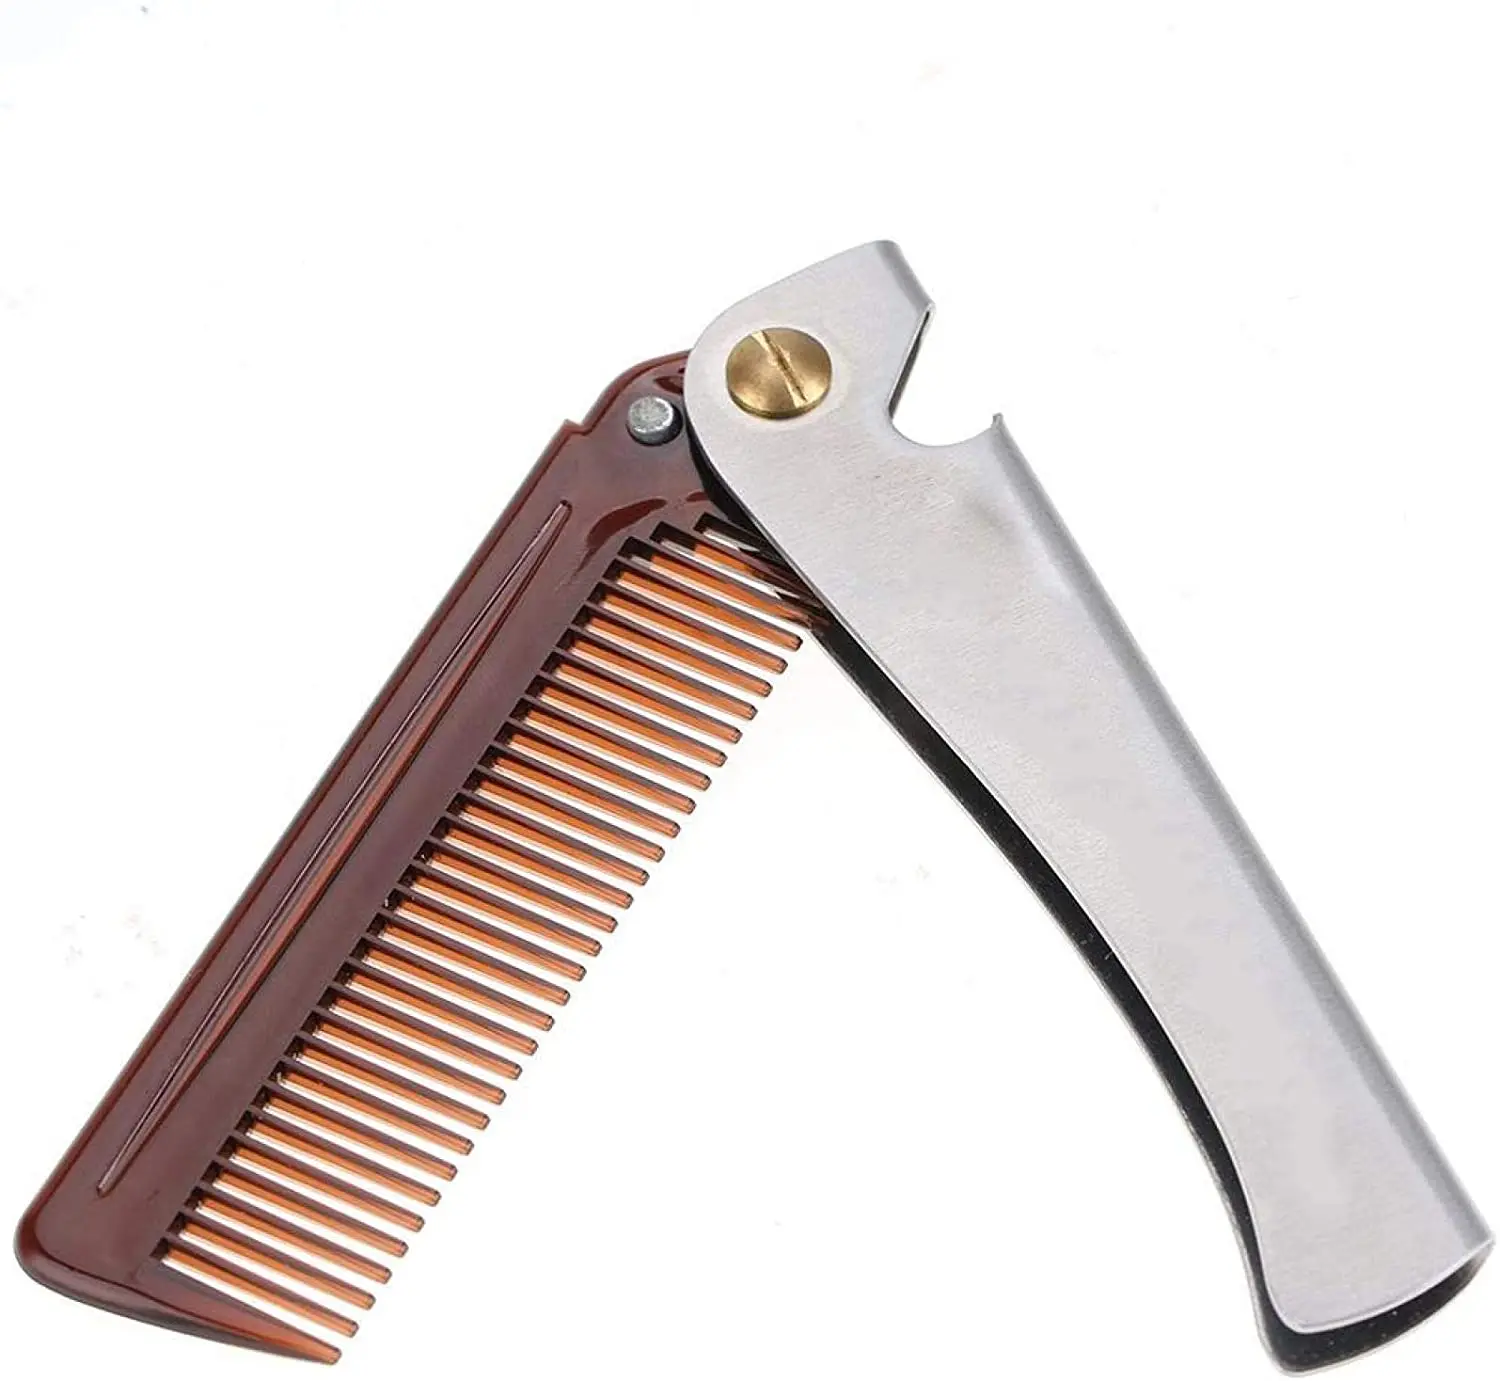 

Handmade Folding Pocket Comb for Men, Fine Tooth Hair Comb Straightener for Everyday Grooming Styling Hair, Beard or Mustache